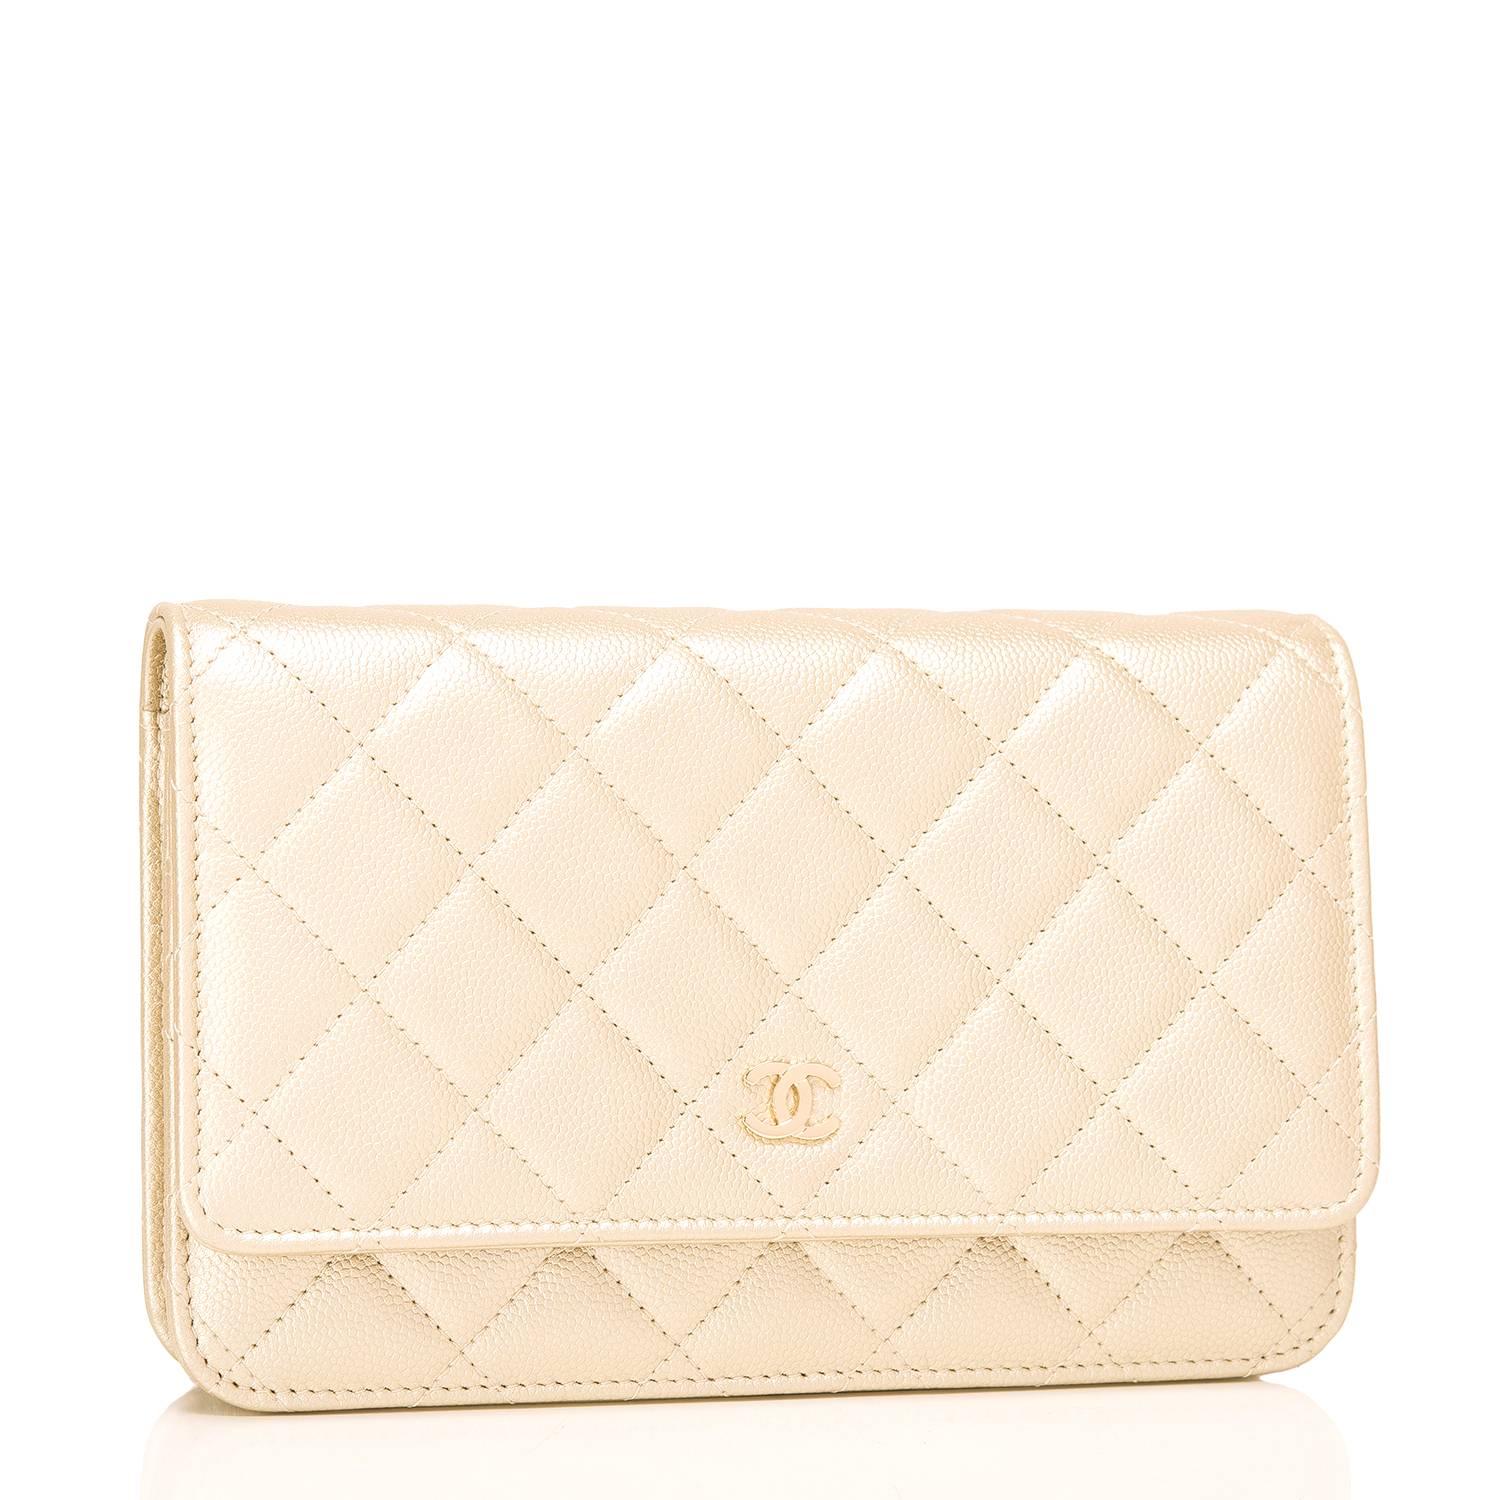 Chanel Classic Wallet on Chain (WOC) of gold caviar leather with gold tone hardware.

This Wallet On Chain features signature Chanel quilting, a front flap with CC charm and hidden snap closure, a half moon rear pocket and an interwoven gold tone